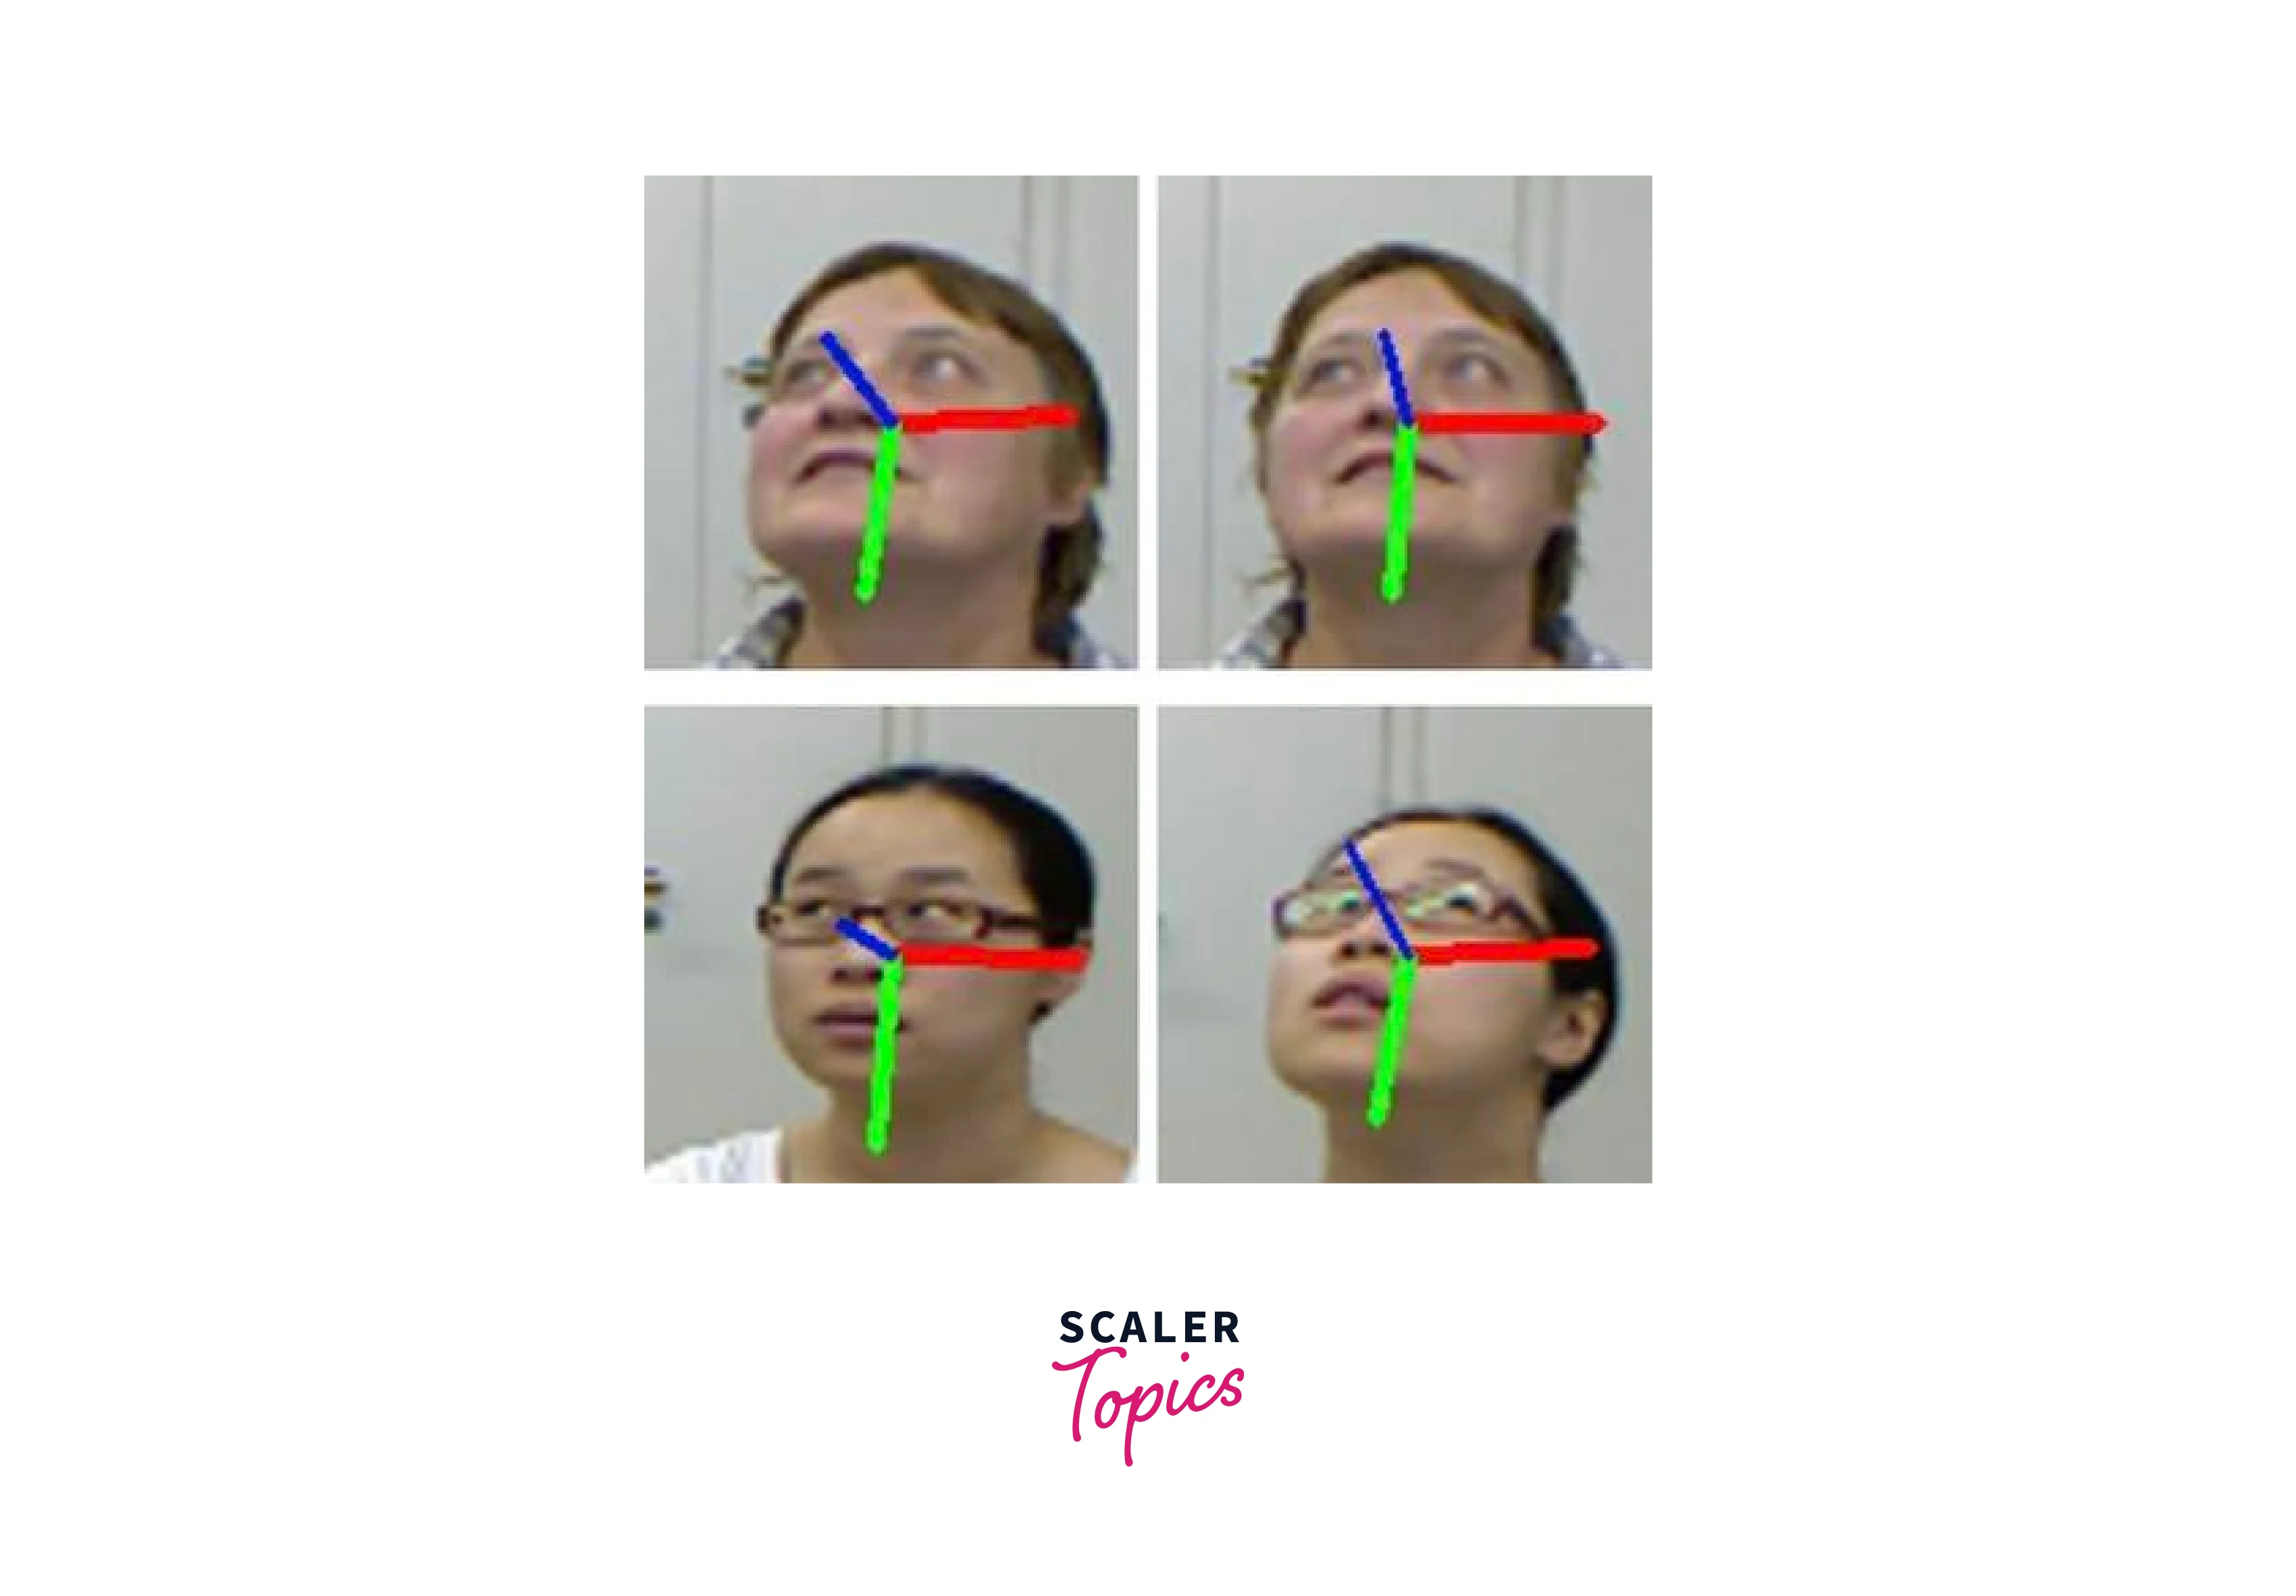 Head Pose And Light Source Estimation On Low Resolution Facial Images Using  A Texture Based Approach